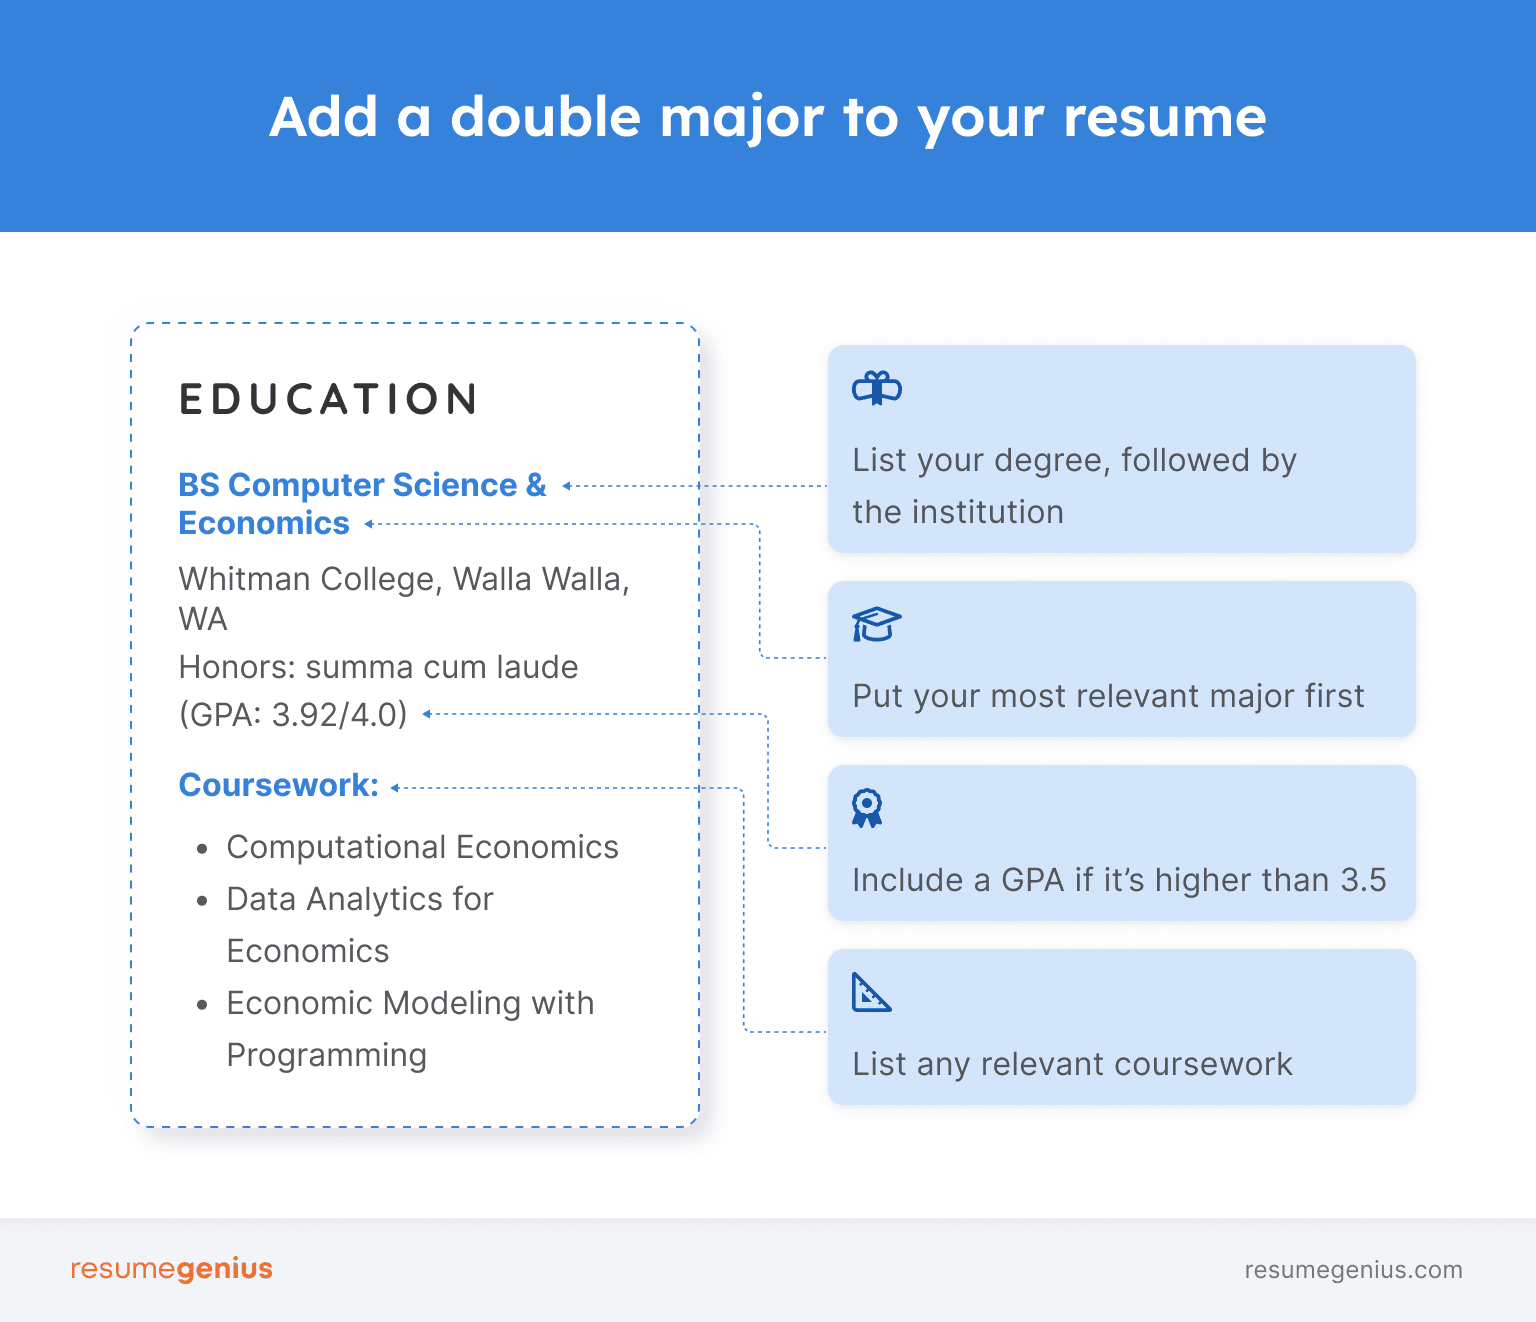 Example of a double major on a resume.